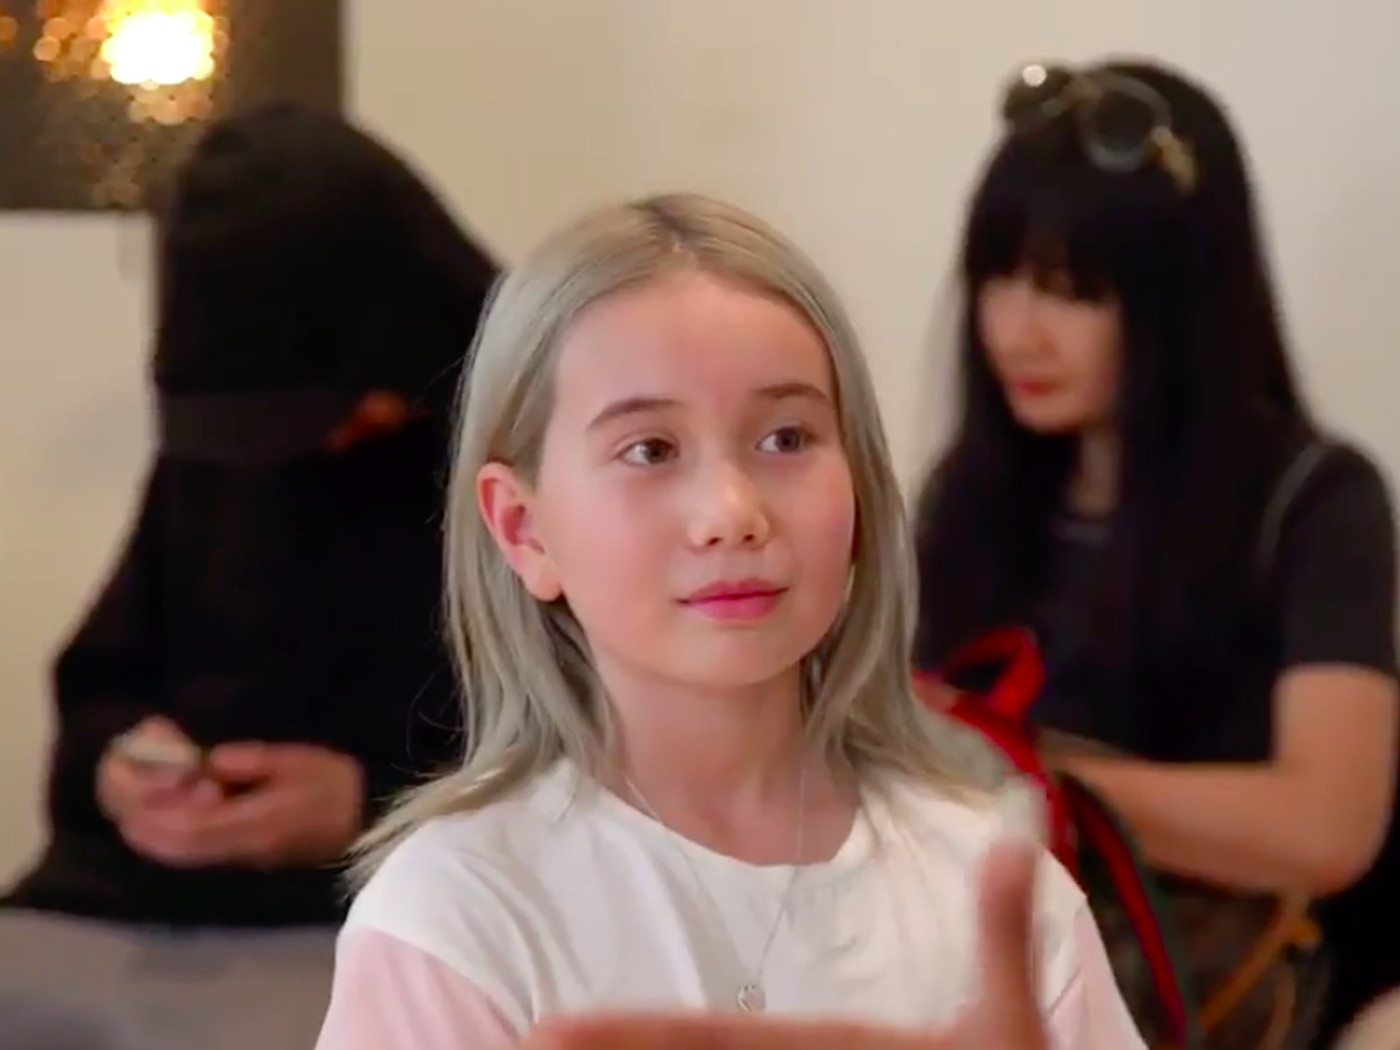 Lil Tay not dead: Child rapper says Instagram was hacked, thanks Meta for restoring account